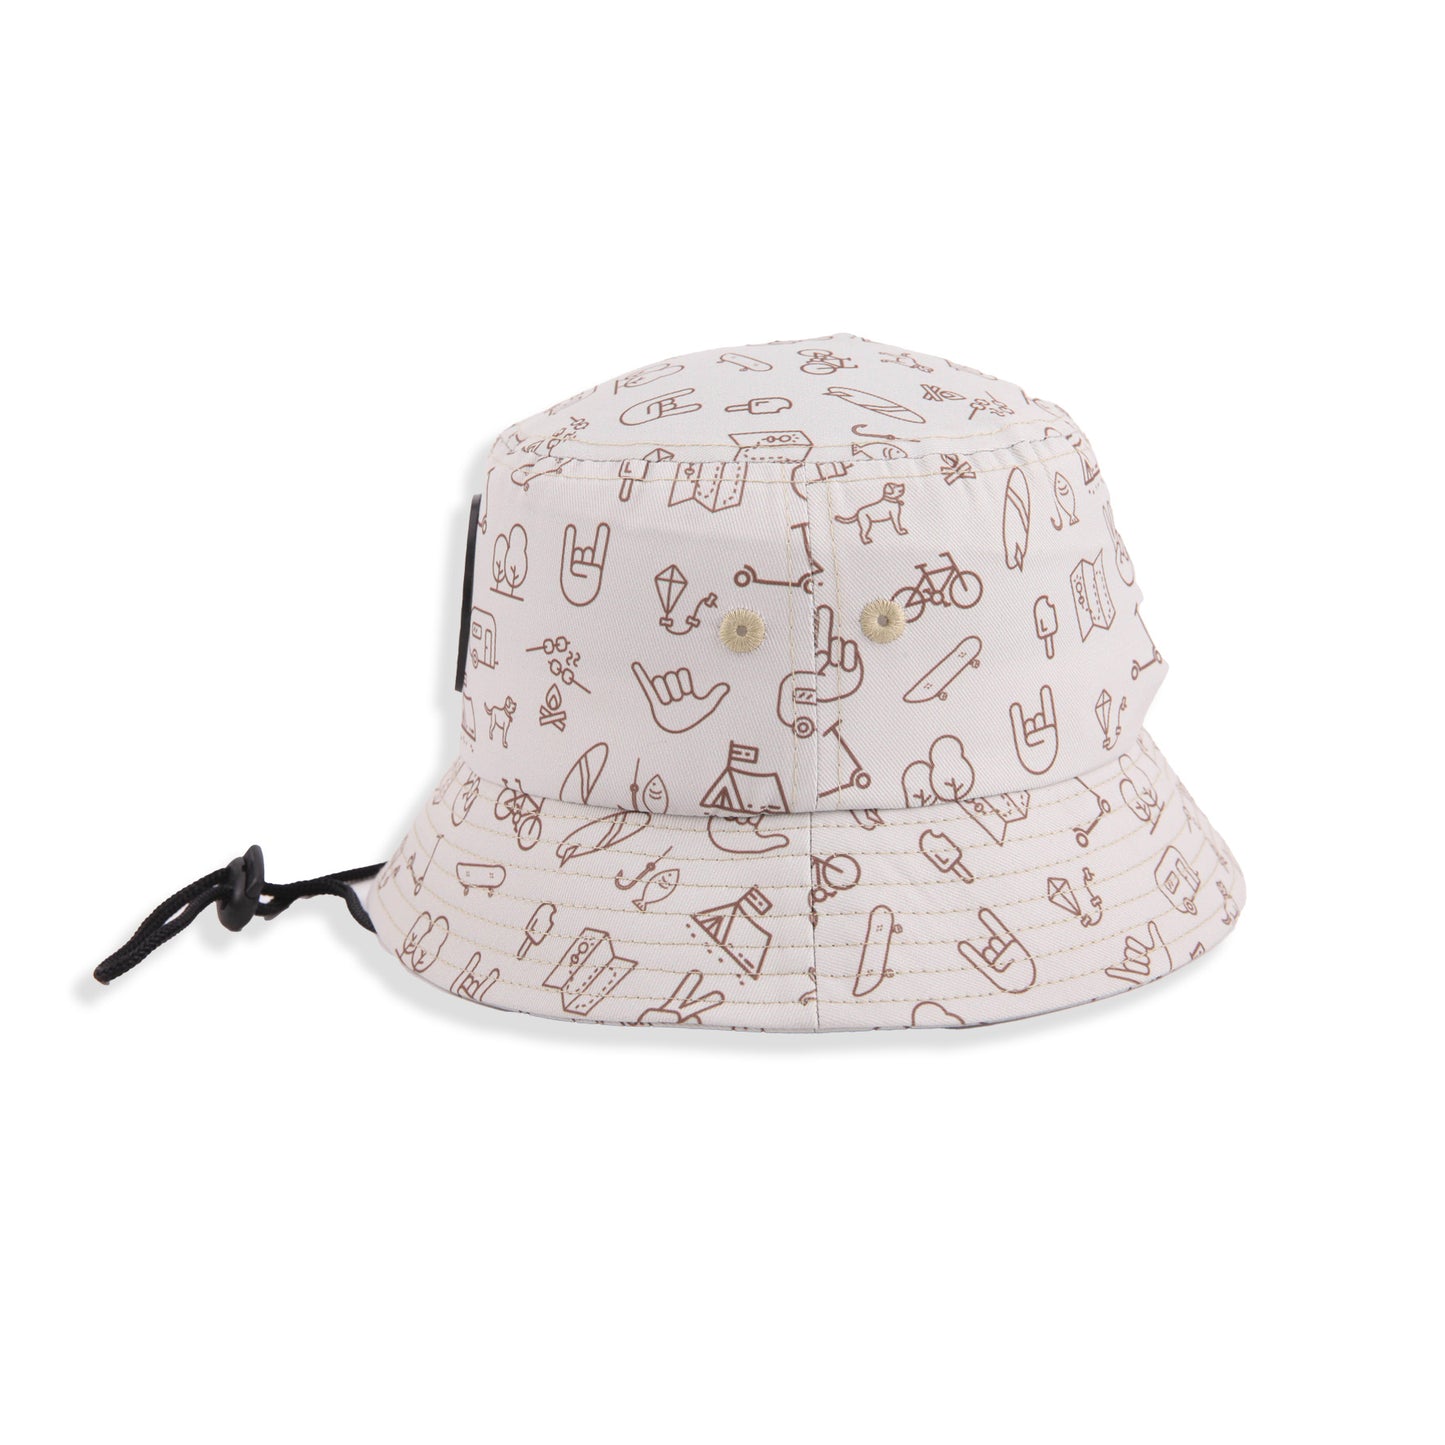 TODDLER AND KIDS BUCKET HAT - CLASSIC PATTERN